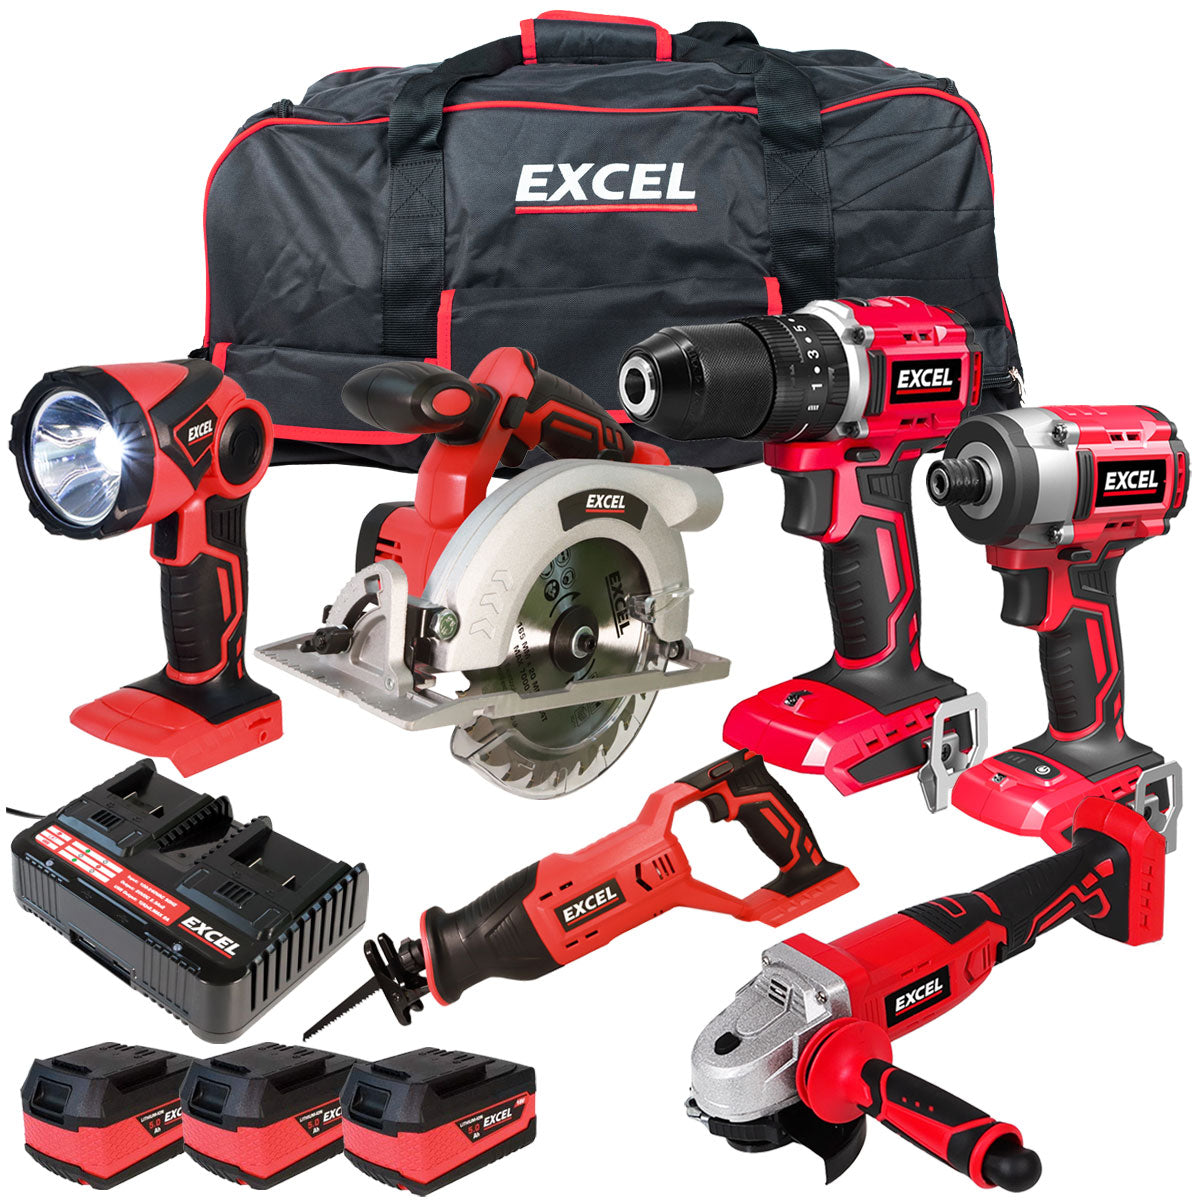 Excel 18V 6 Piece Power Tool Kit with 3 x 5.0Ah Batteries & Charger EXLKIT-16287